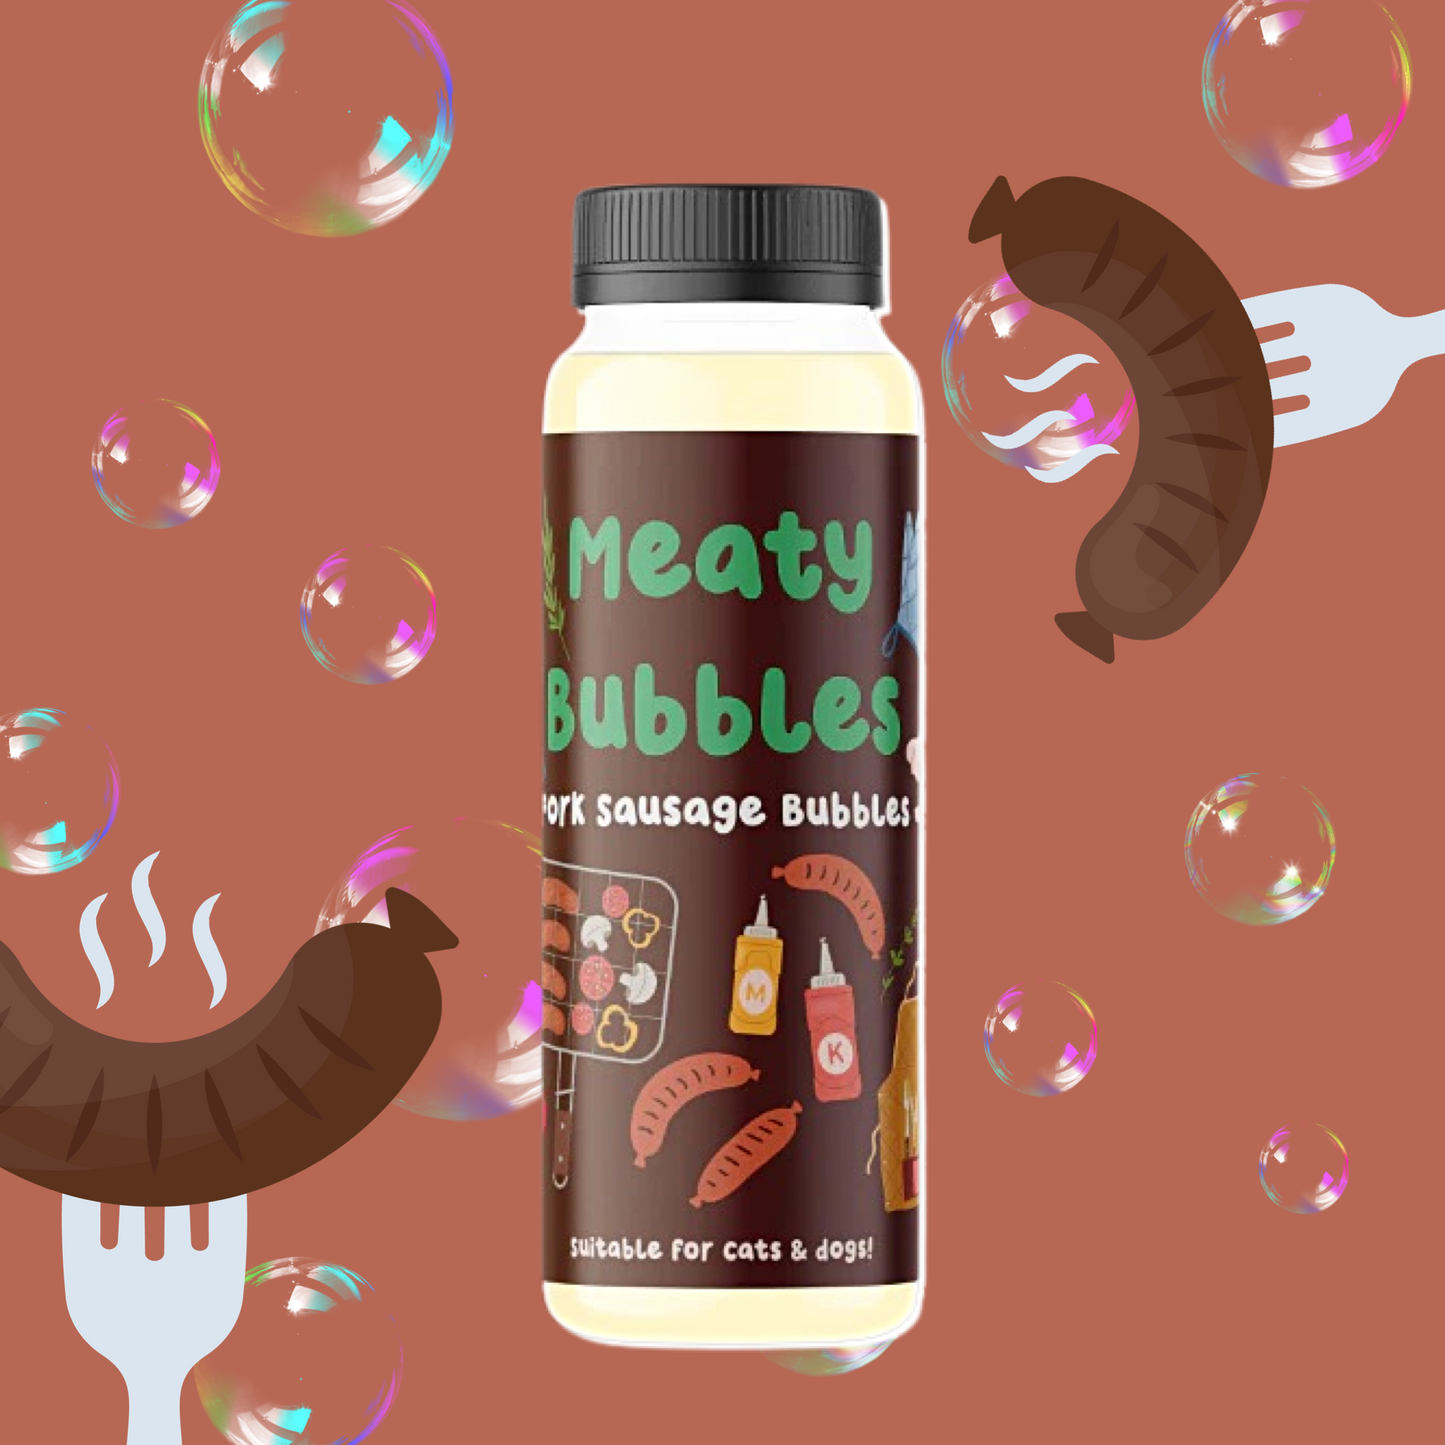 Meaty Bubbles - Pork Sausage Flavoured Bubbles for Dogs and Puppies